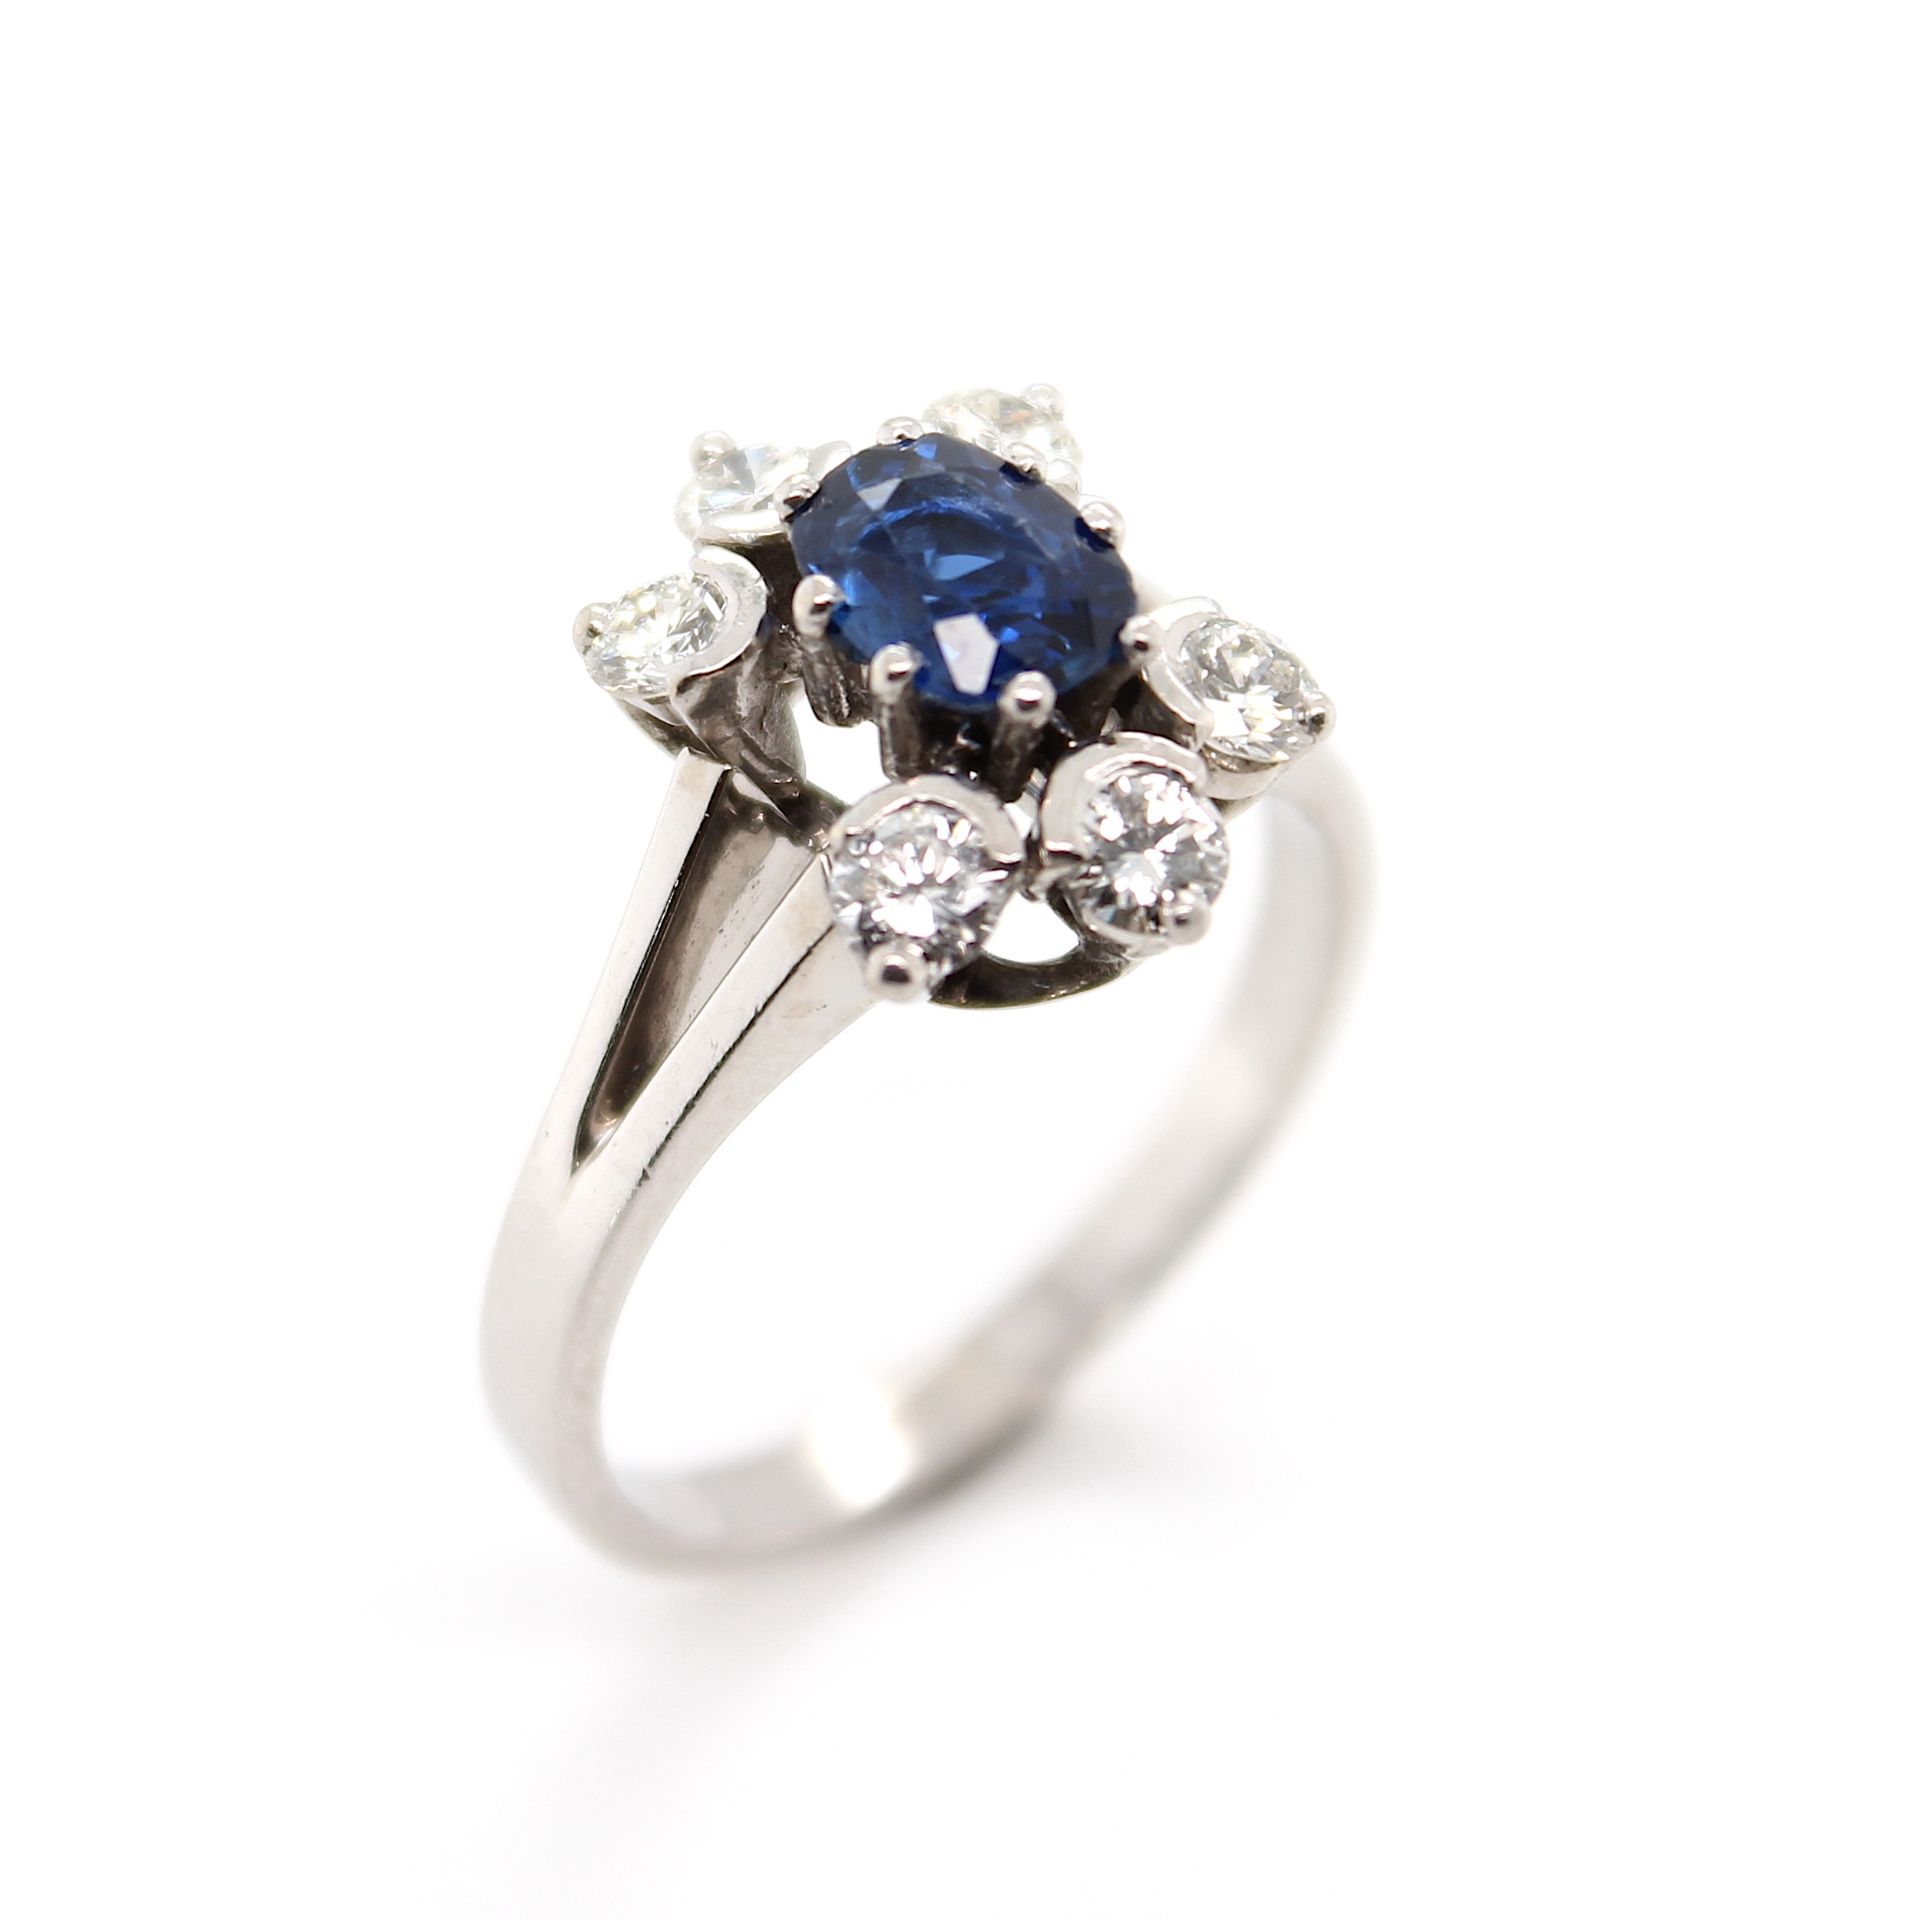 Ring with sapphire and total ca. 0.60 ct brilliants - Image 2 of 4